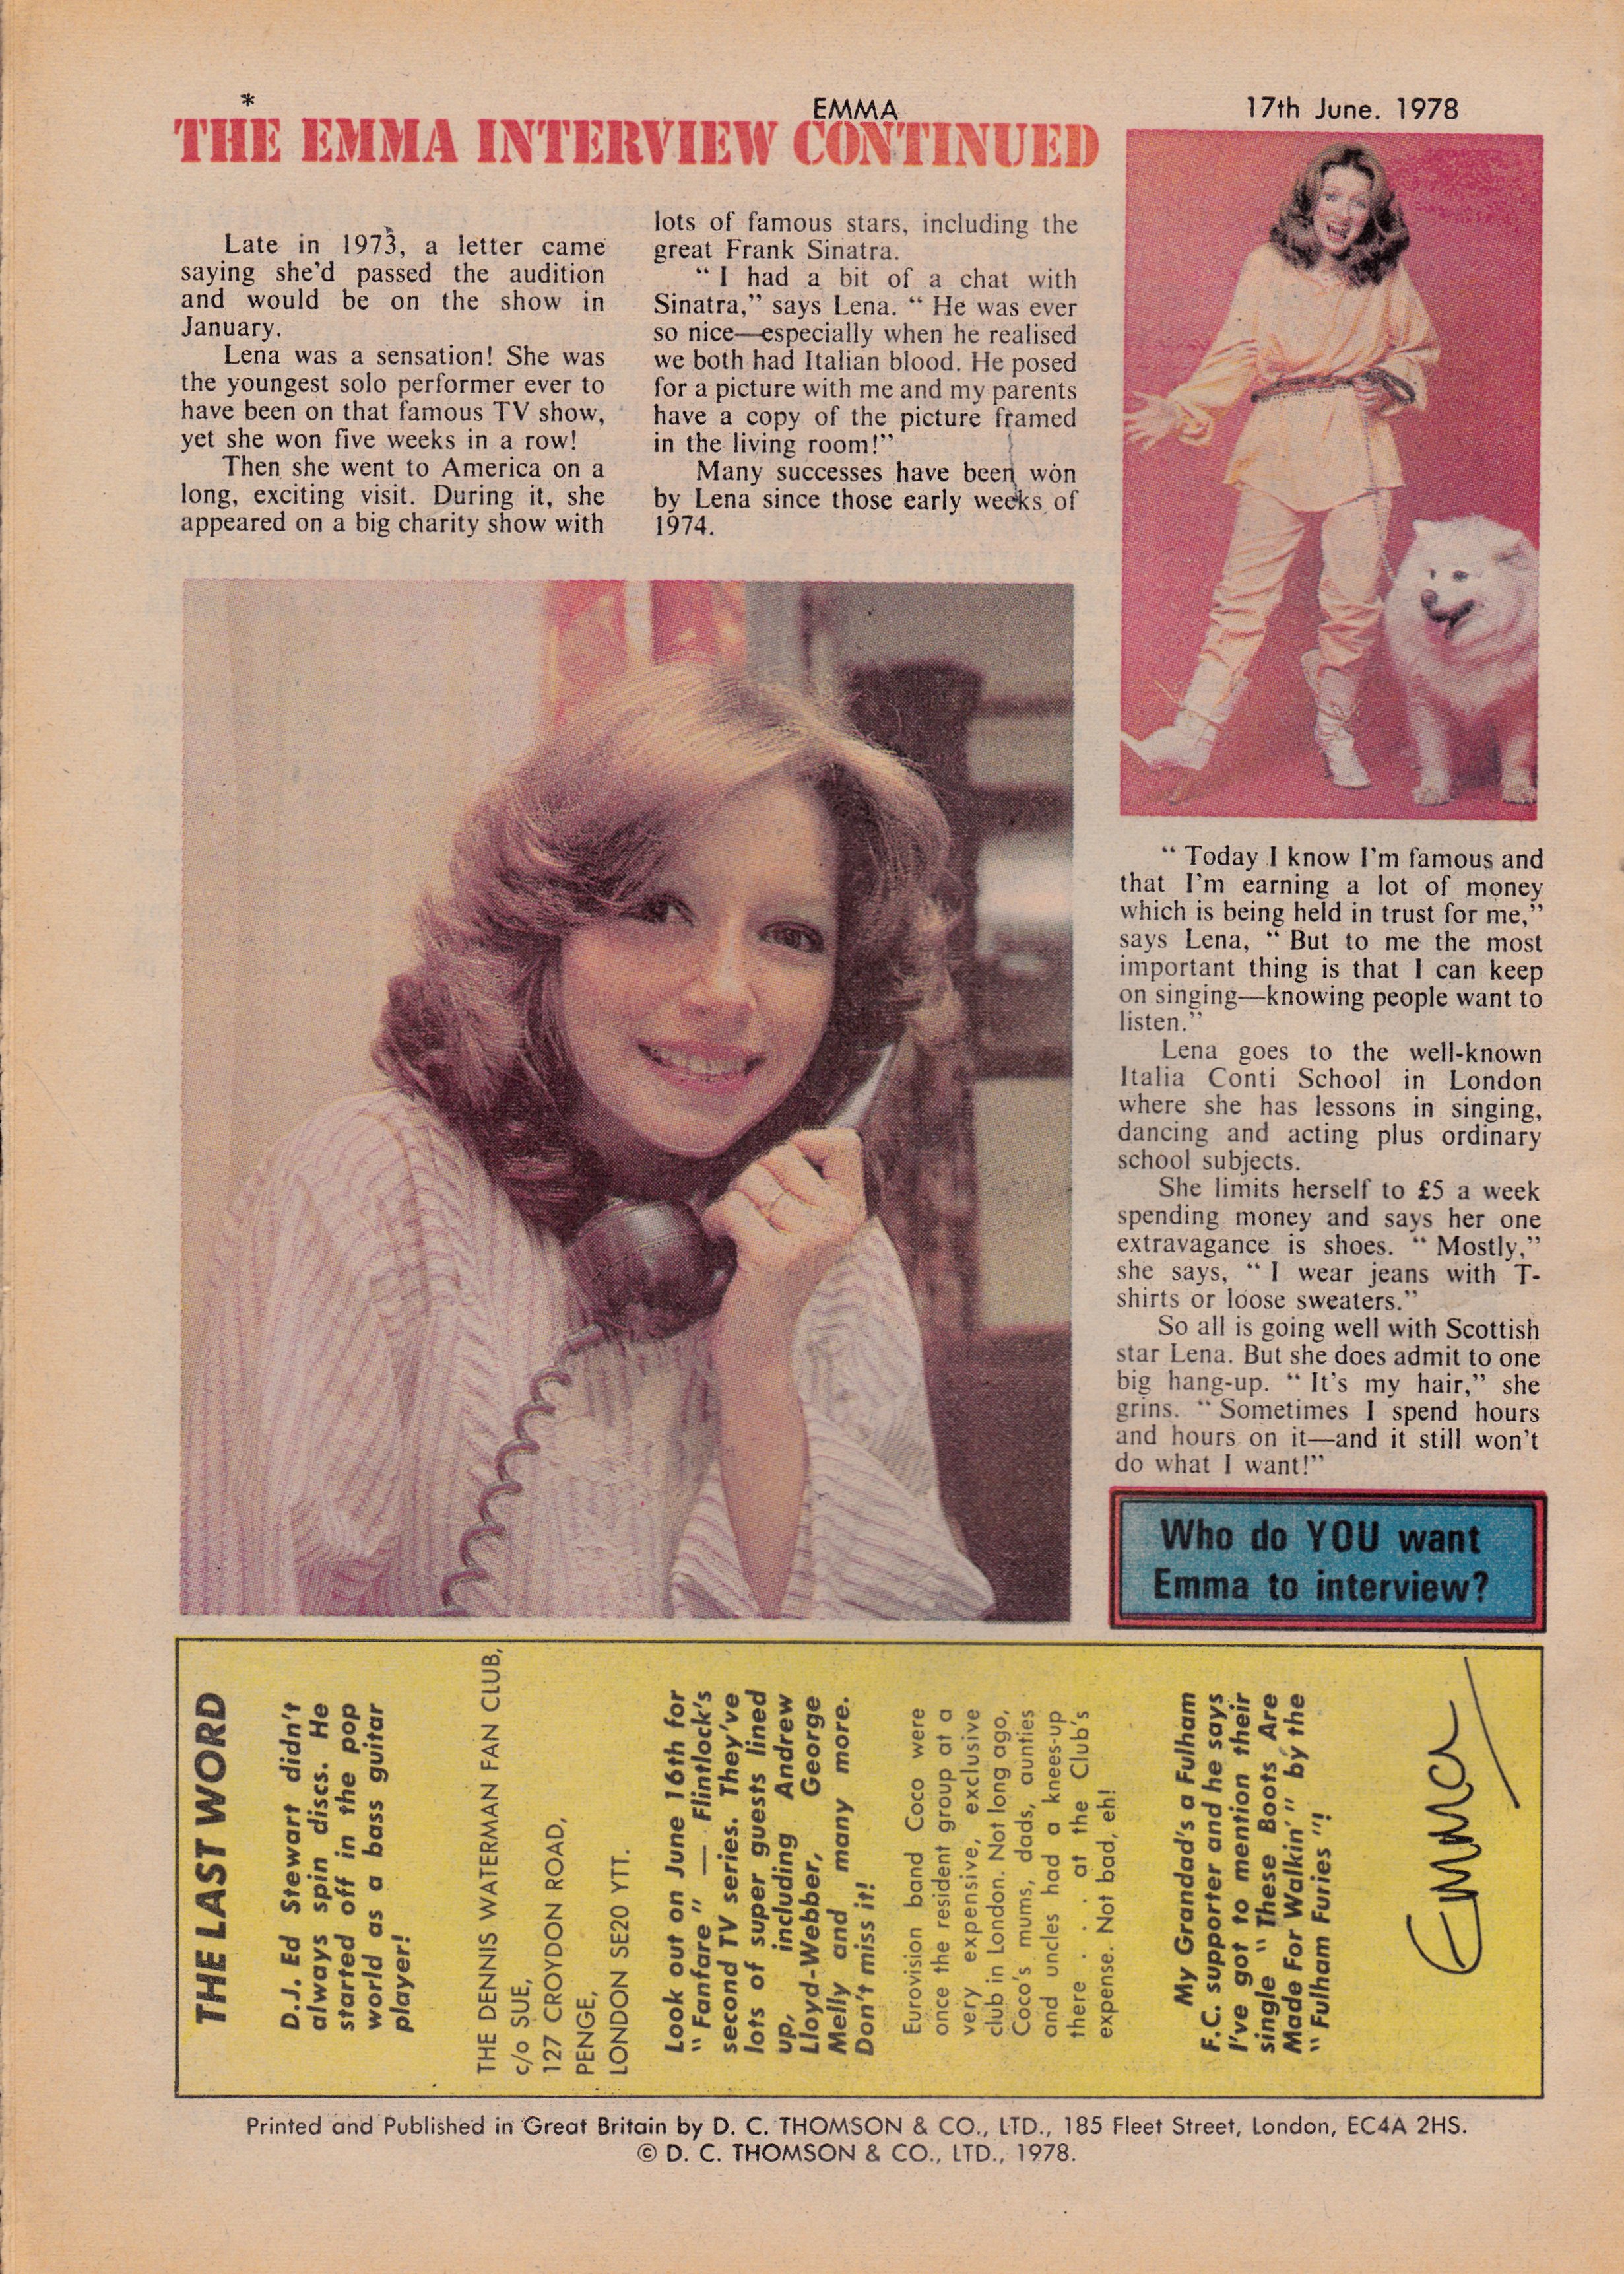 End Of Lena Zavaroni's Article for The Comic Emma Dated 17June 1978